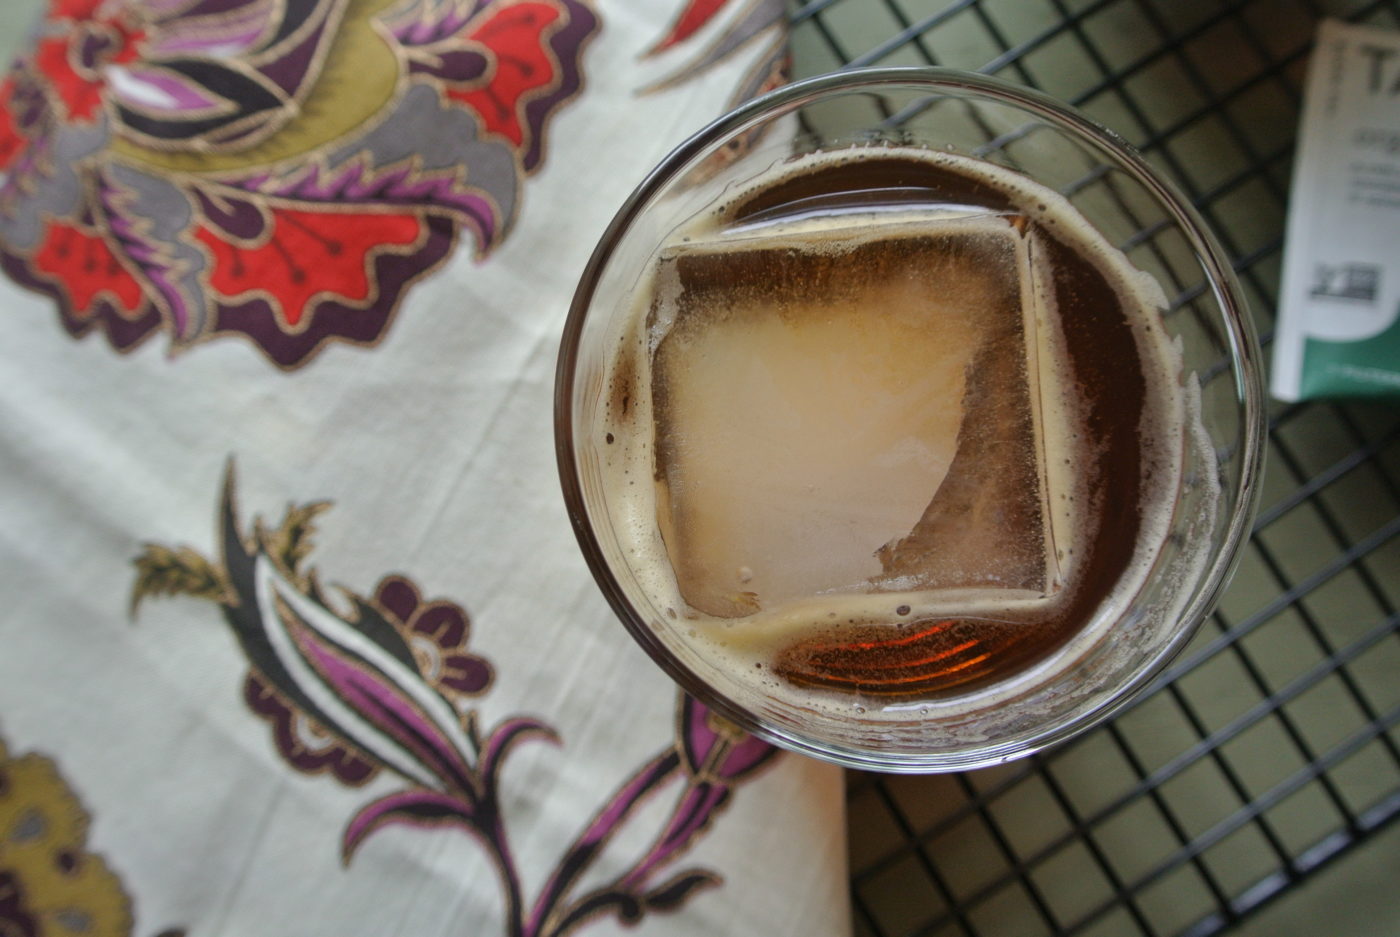 Chai infused bourbon is quite versatile. It can be enjoyed on a warm summer day or a cool winter night to warm you up.